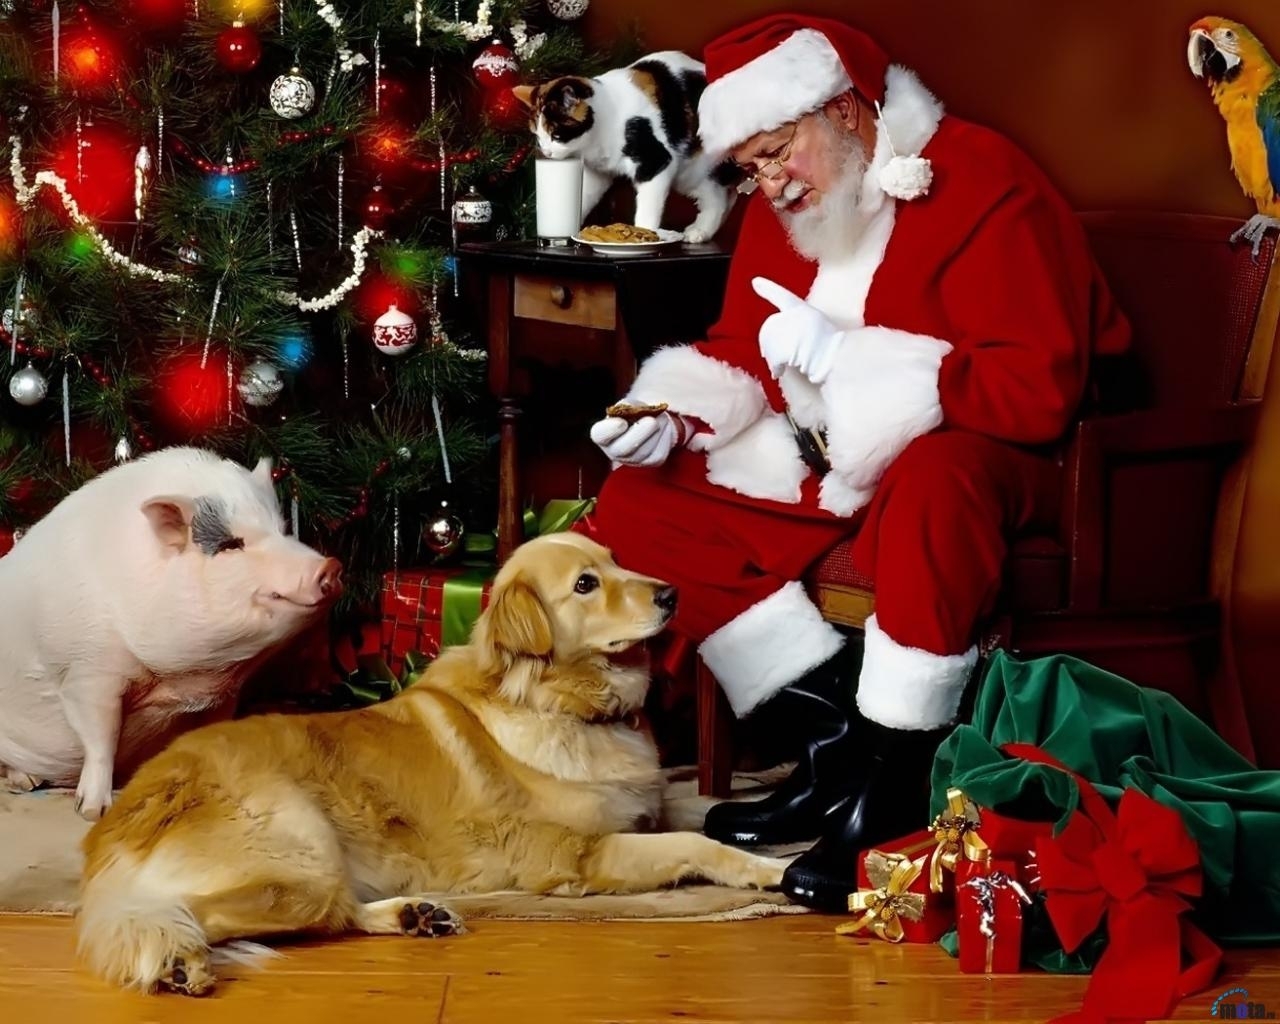 new year, christmas xmas, santa claus, animals, holidays, cats, dogs, jack frost, pigs 2160p